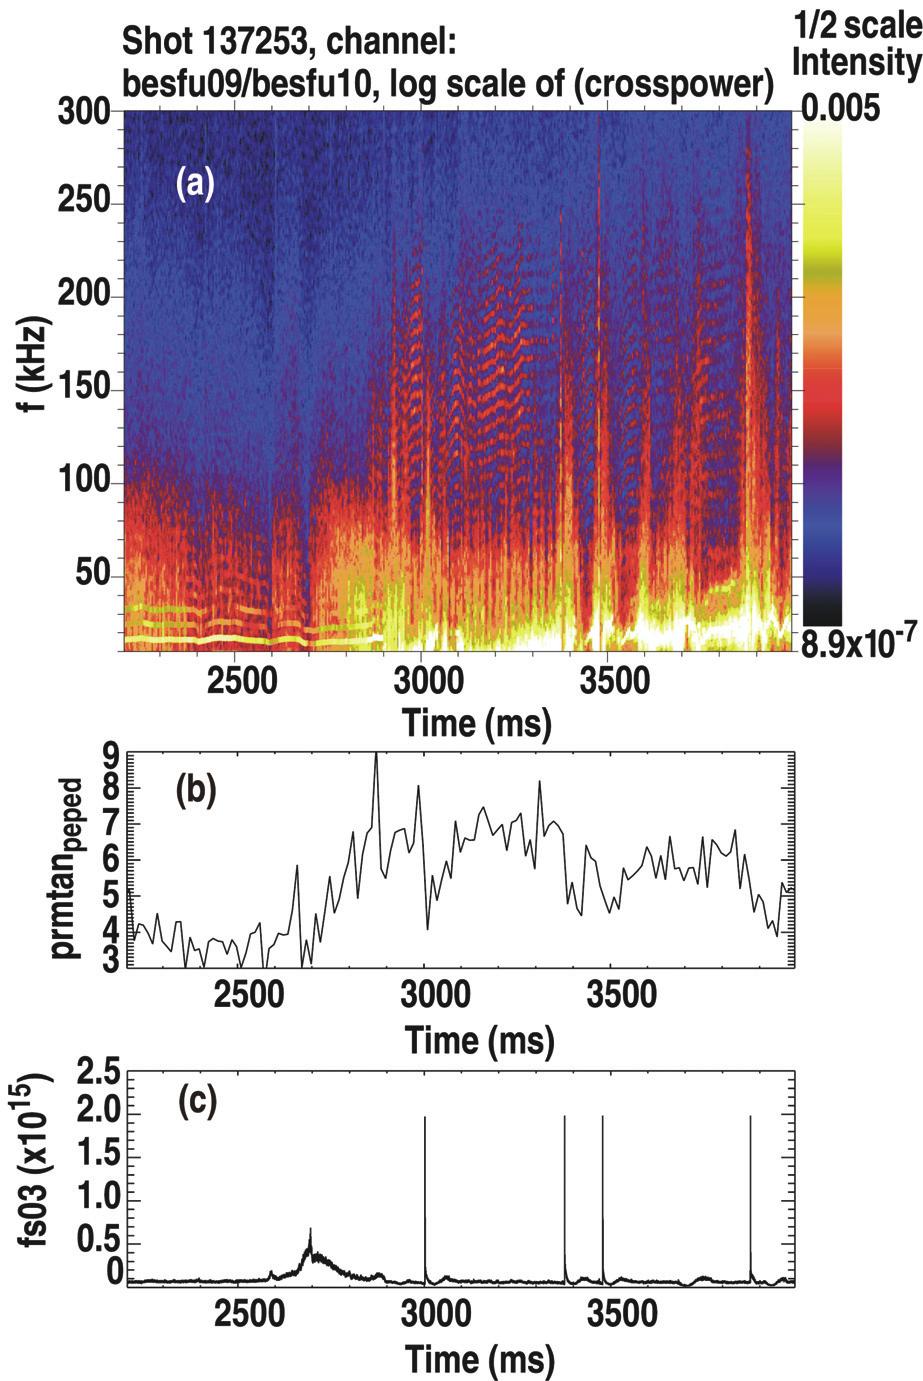 FIG. 3. (a) Cross spectrum between two poloidally separated BES channels showing HFC from ~100 250 khz starting from time ~2900 ms to 40